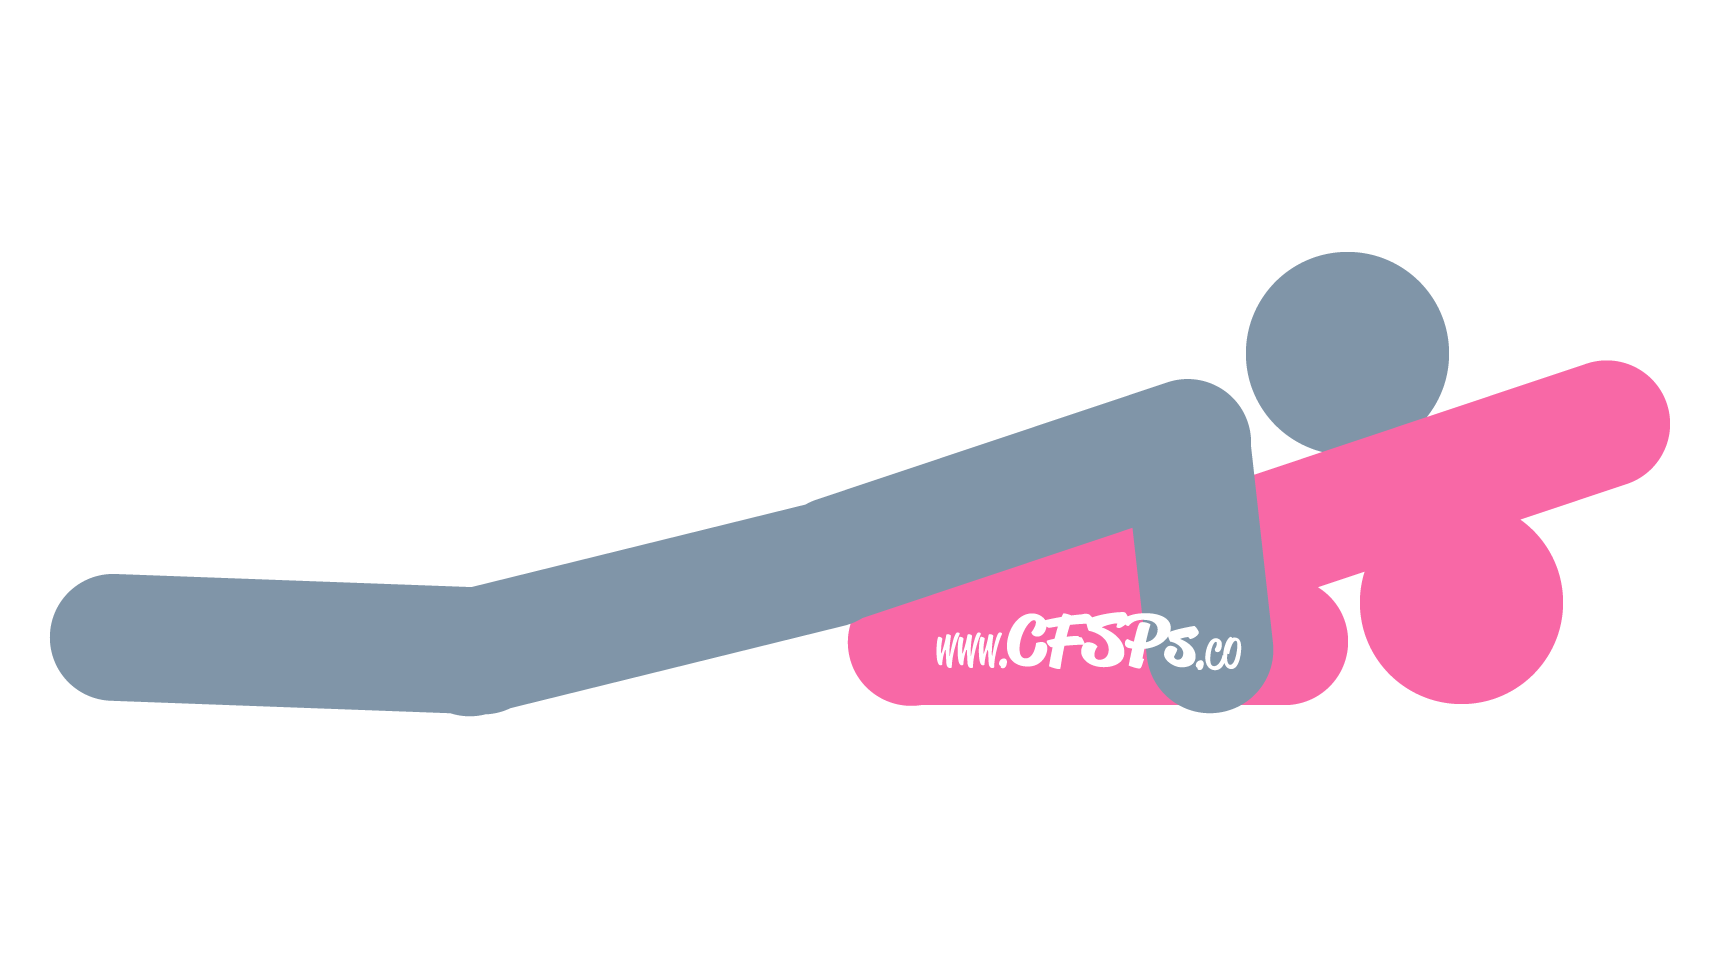 This stick figure image depicts a man and woman having sex in the Foot In Mouth sex position. The woman is lying on her back with her legs straight and brought up to her chest. The man is lying on her and supporting his body with his elbows on the bed near her shoulders.